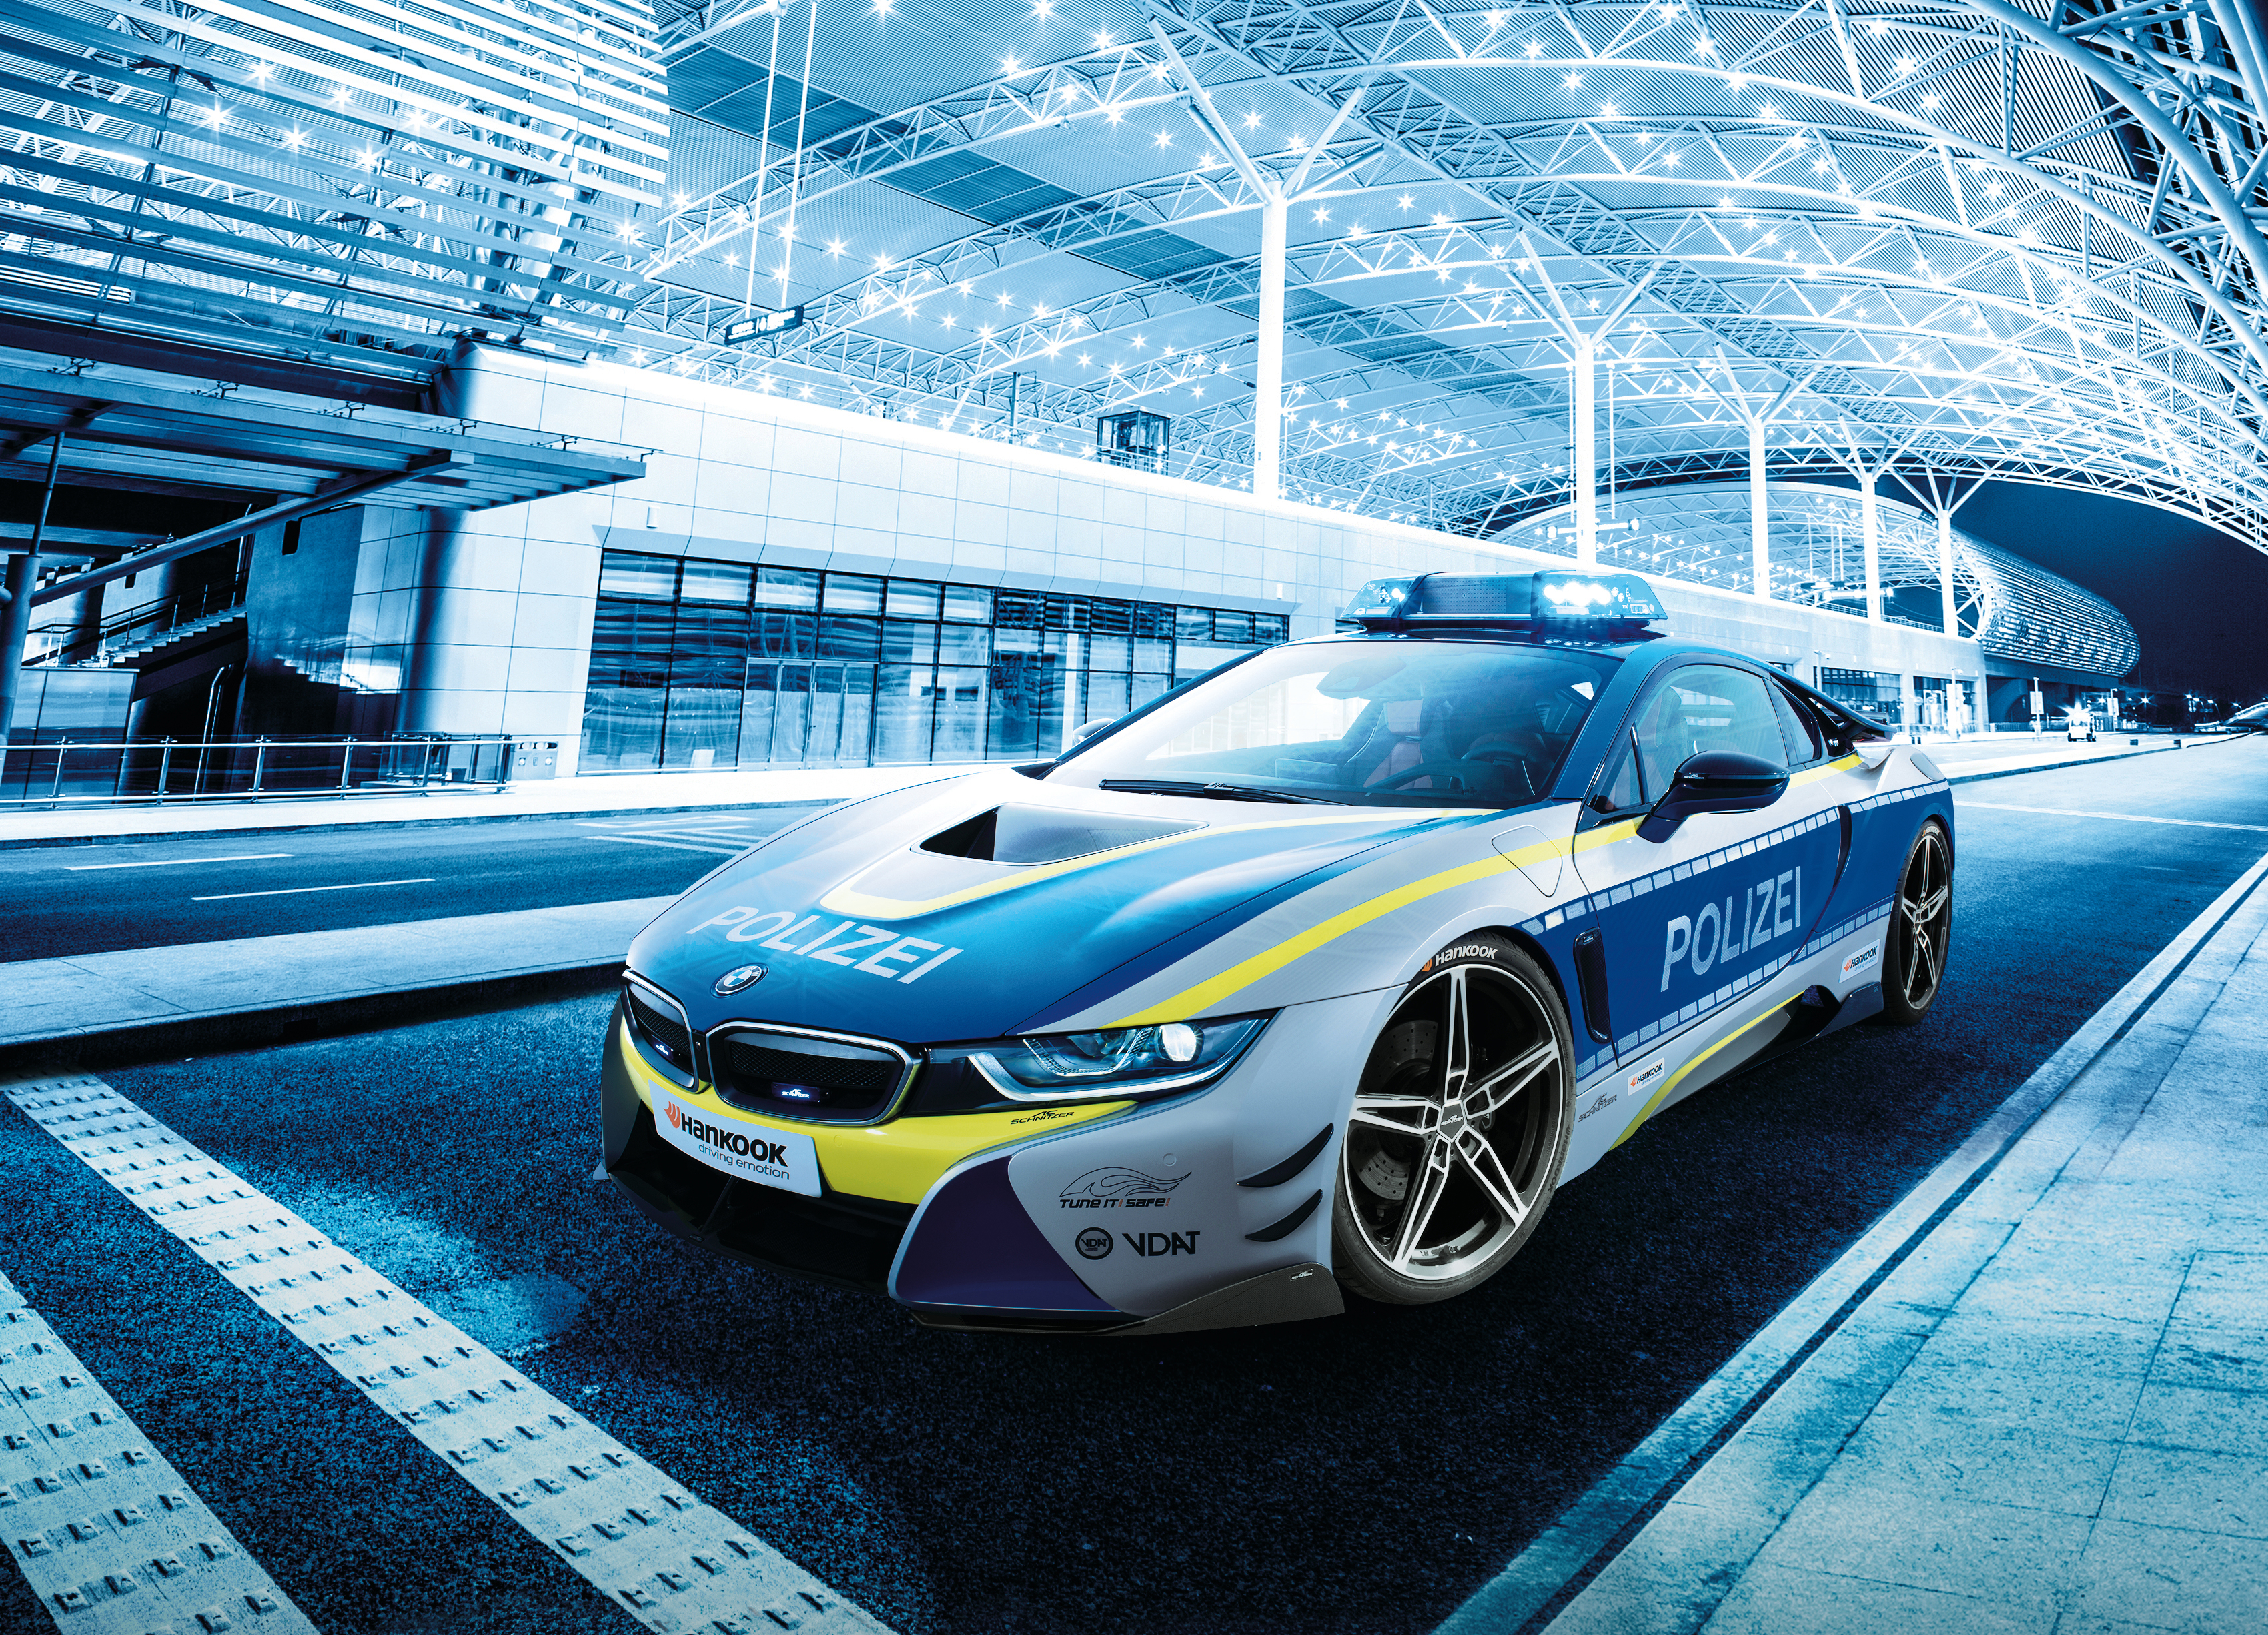 Wallpapers BMW I8 police cars on the desktop